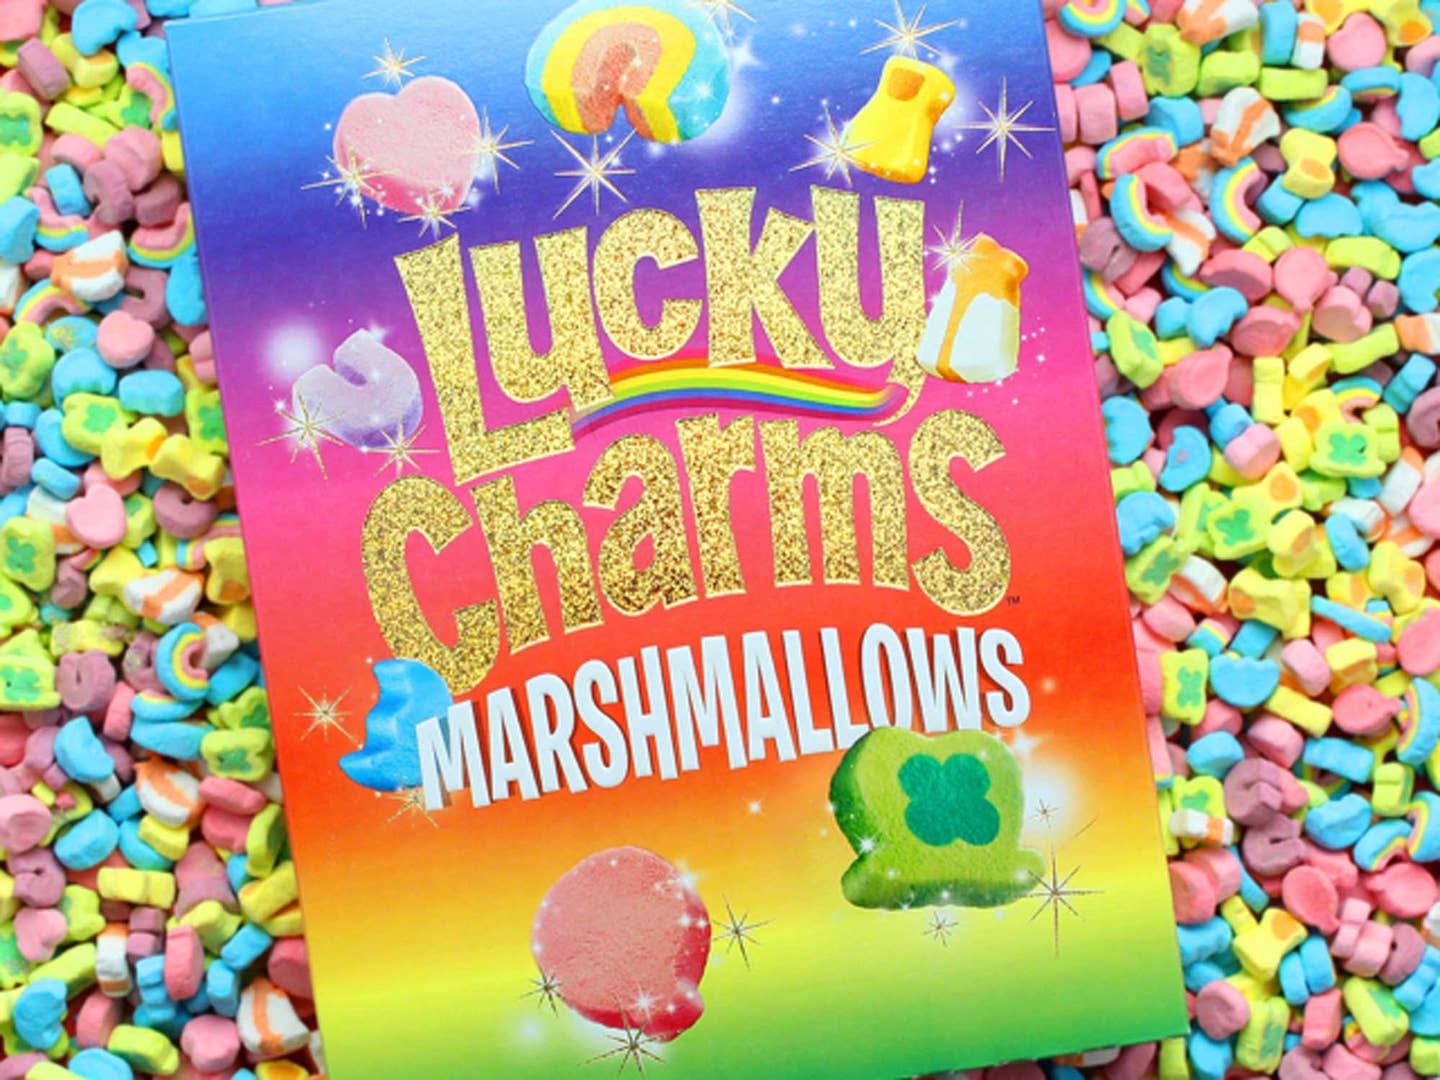 You Can Now Get a Box of Marshmallow-Only Lucky Charms